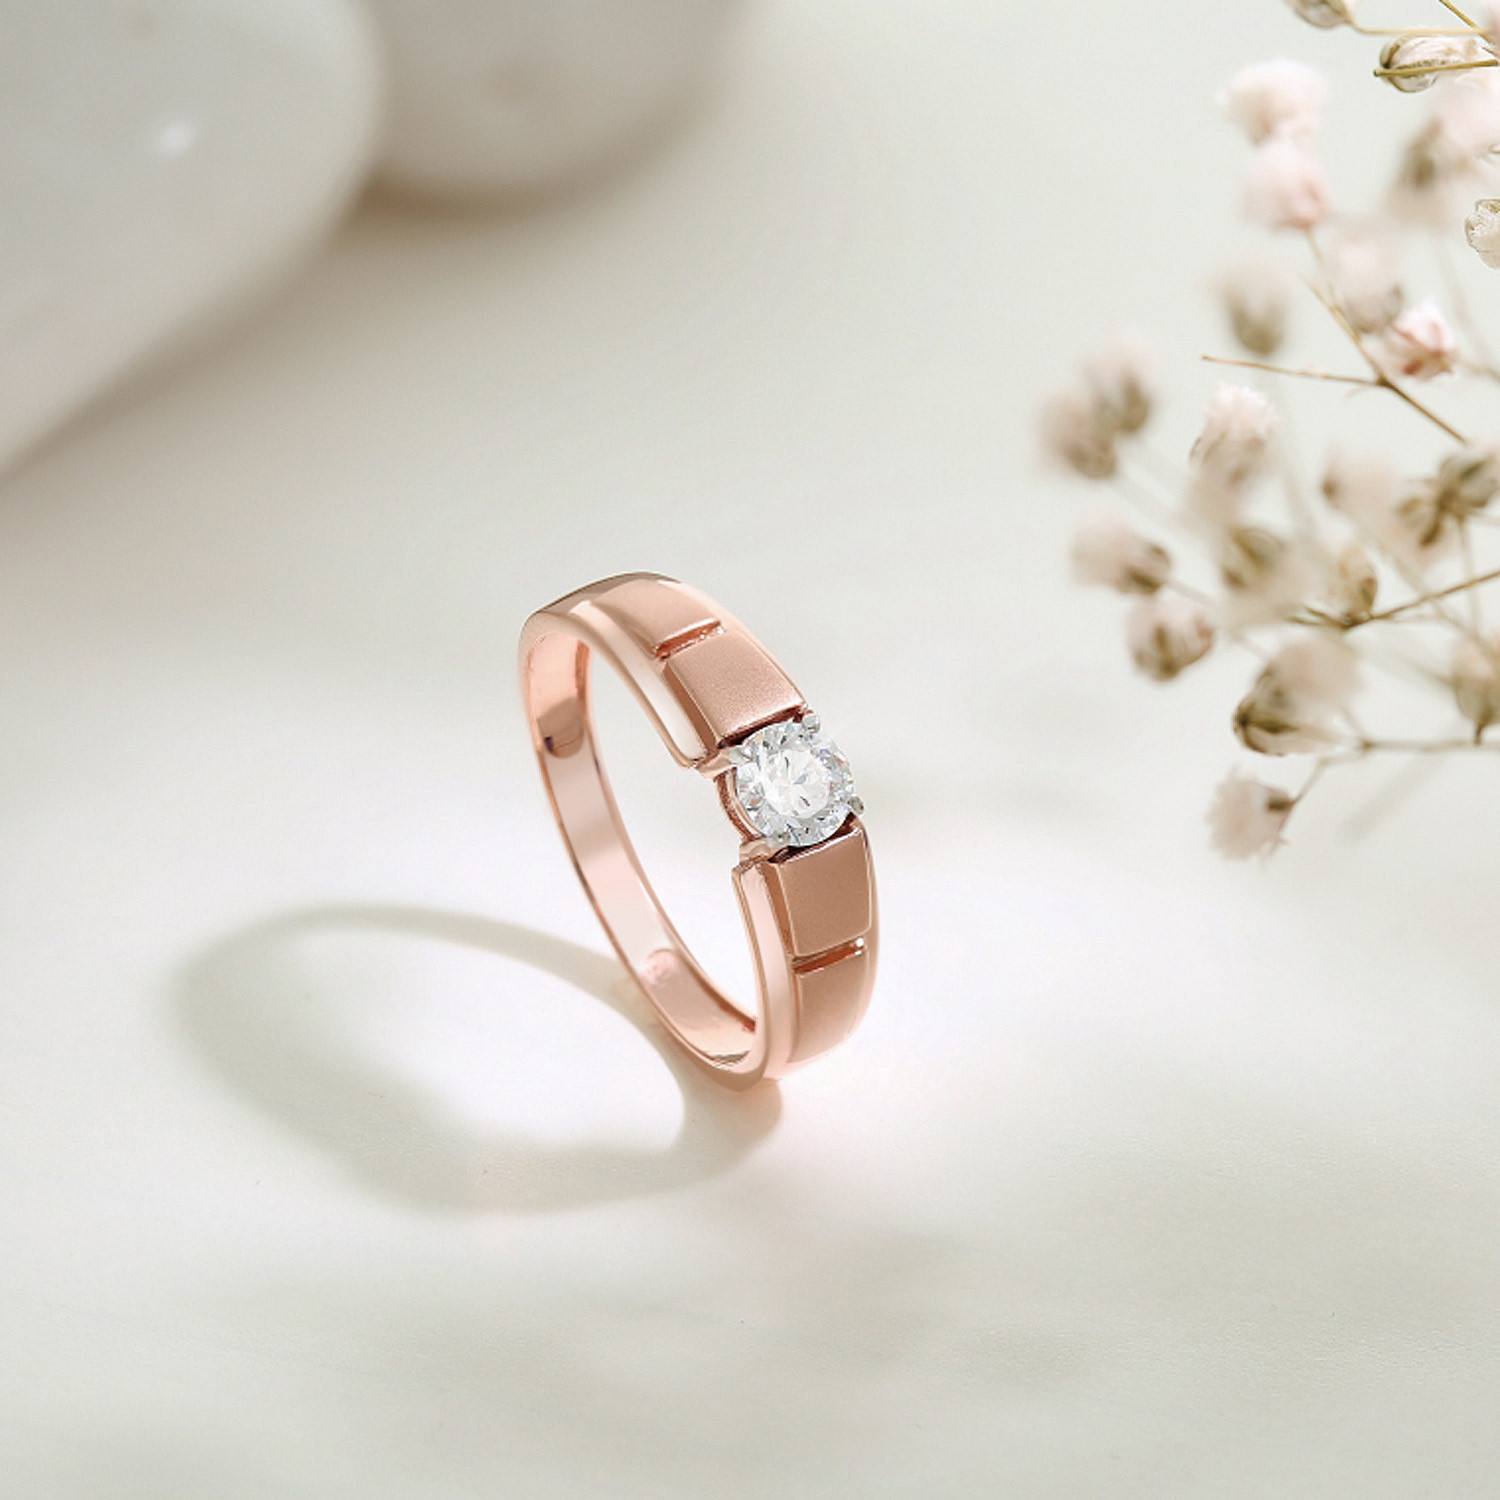 Interlinked heart rose-gold ring | Salty – Salty Accessories